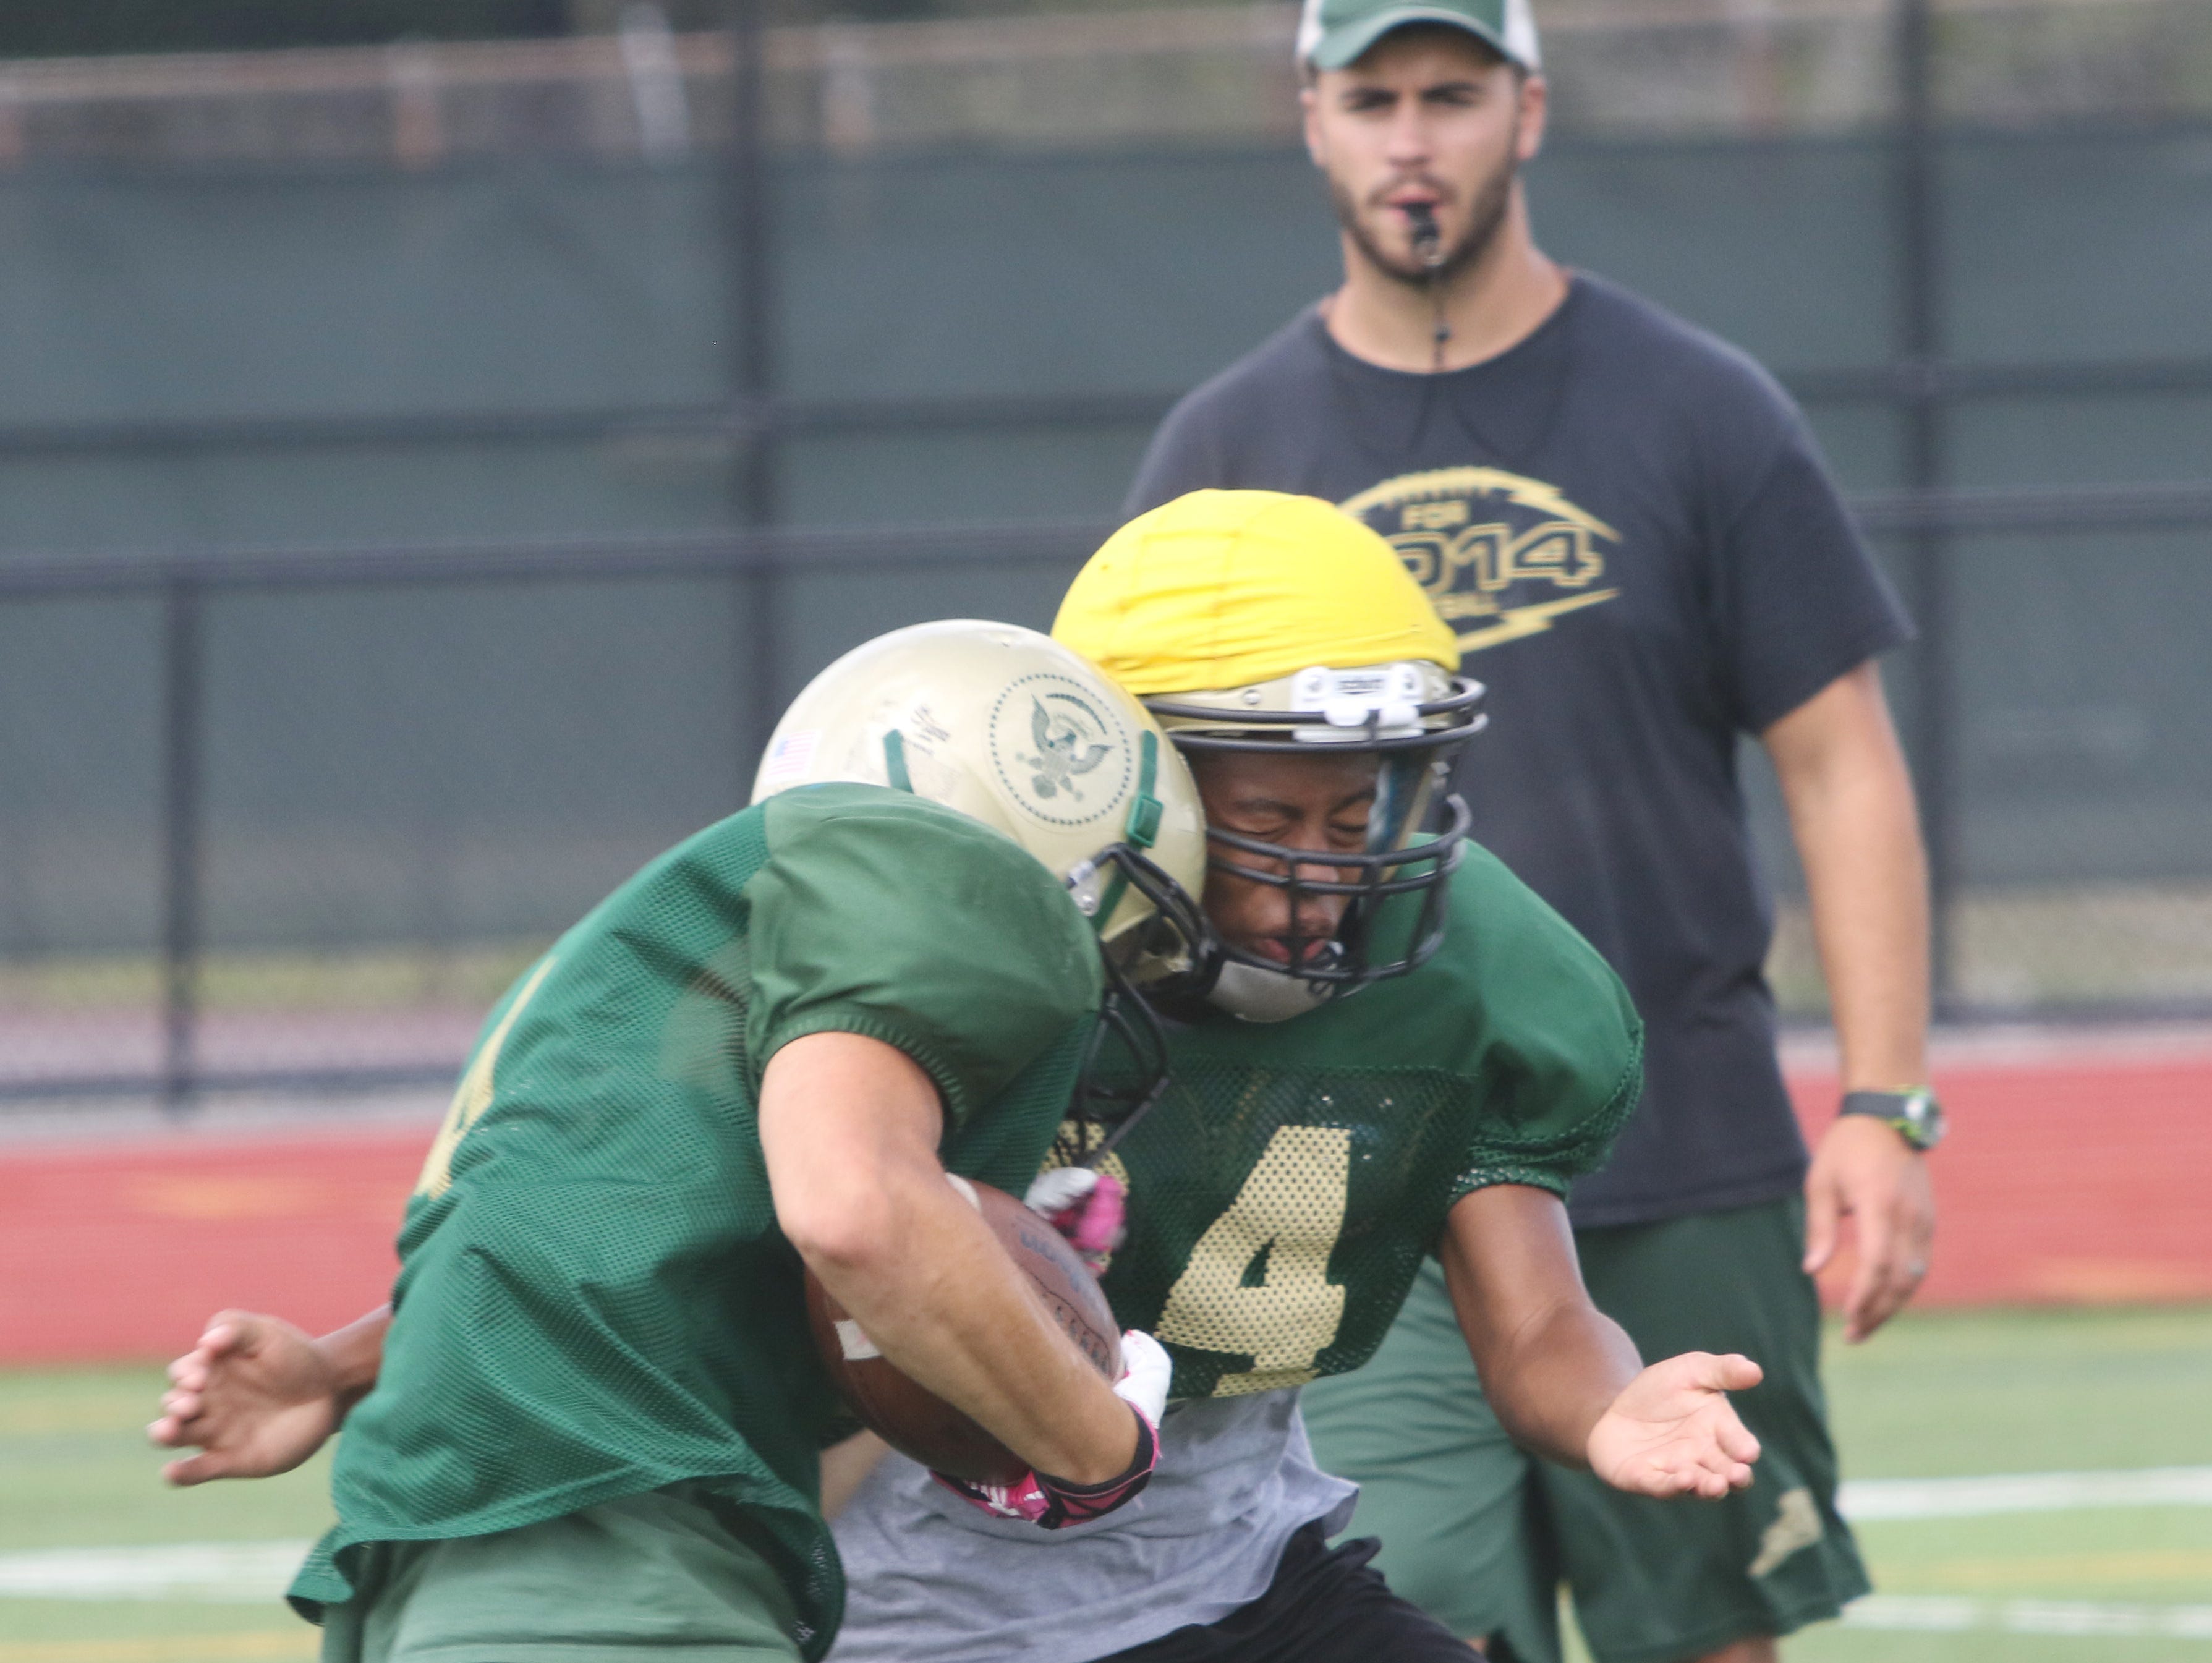 A pair of Franklin D. Roosevelt High School football players collide during a preseason practice on Aug. 20.